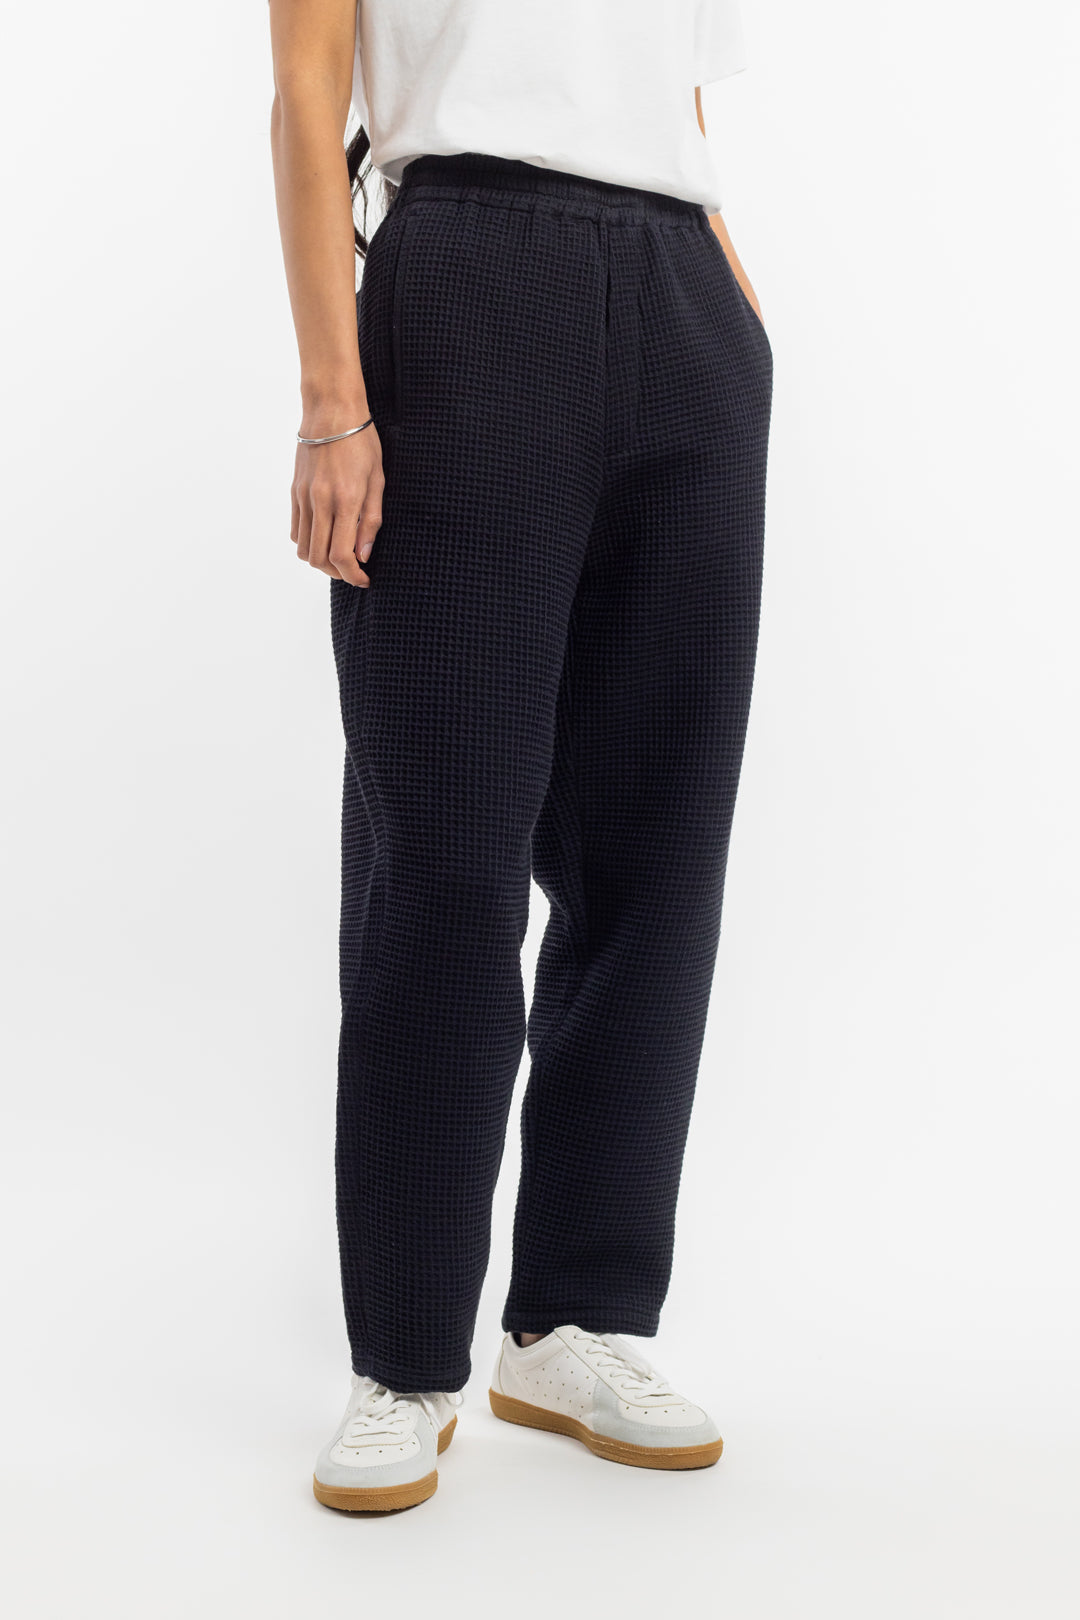 Black wide trousers Waffle made from 100% organic cotton by Rotholz